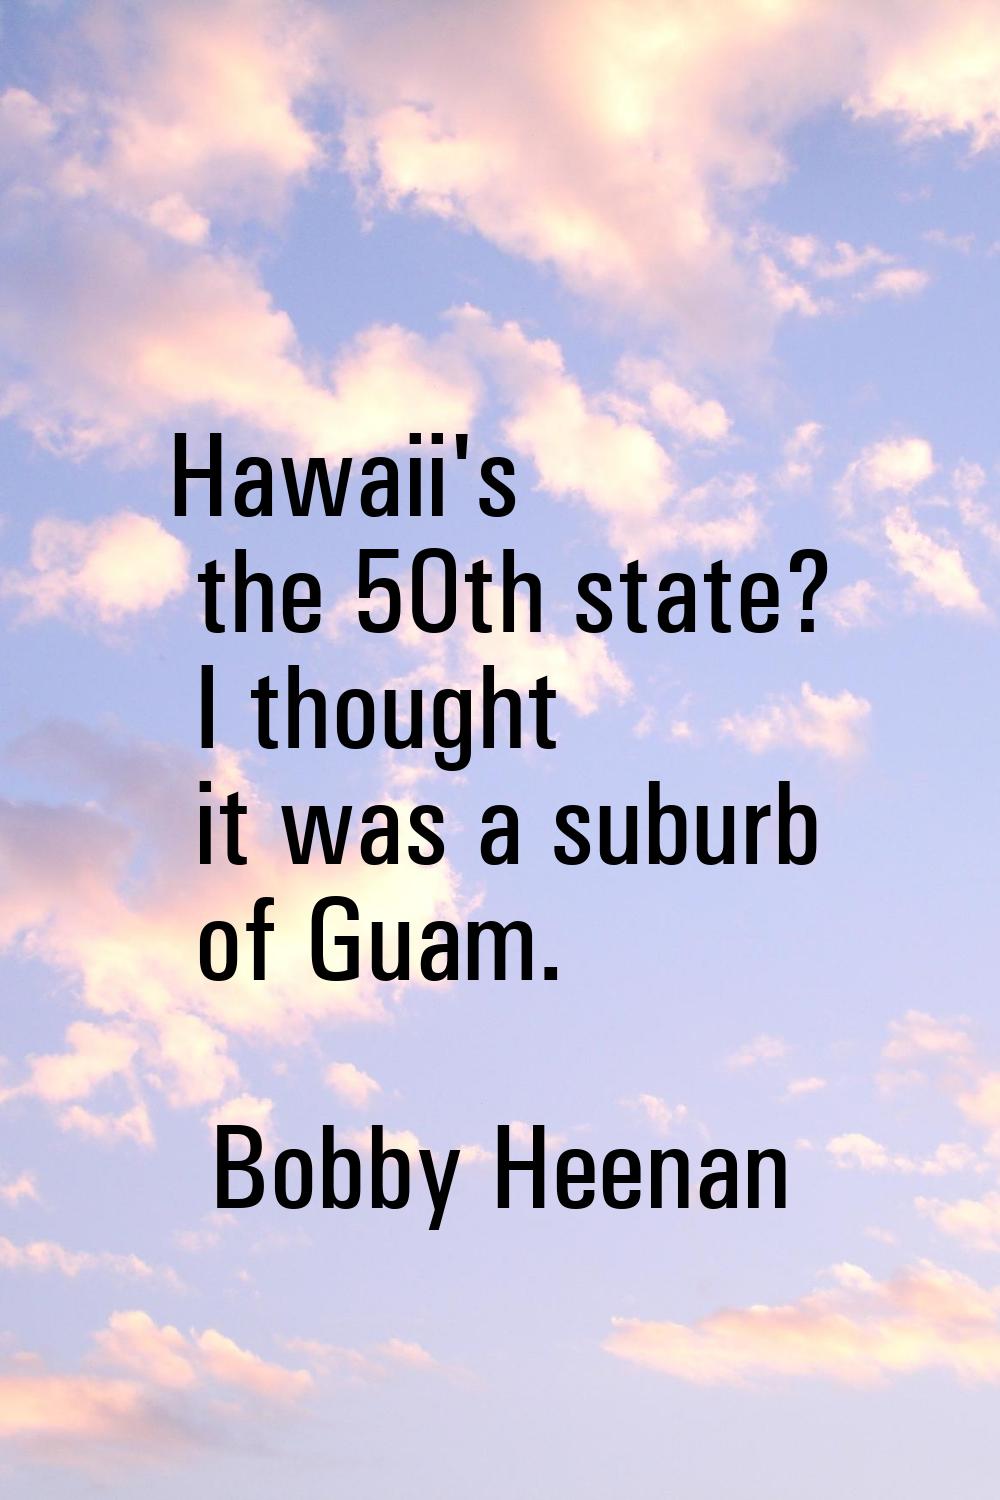 Hawaii's the 50th state? I thought it was a suburb of Guam.